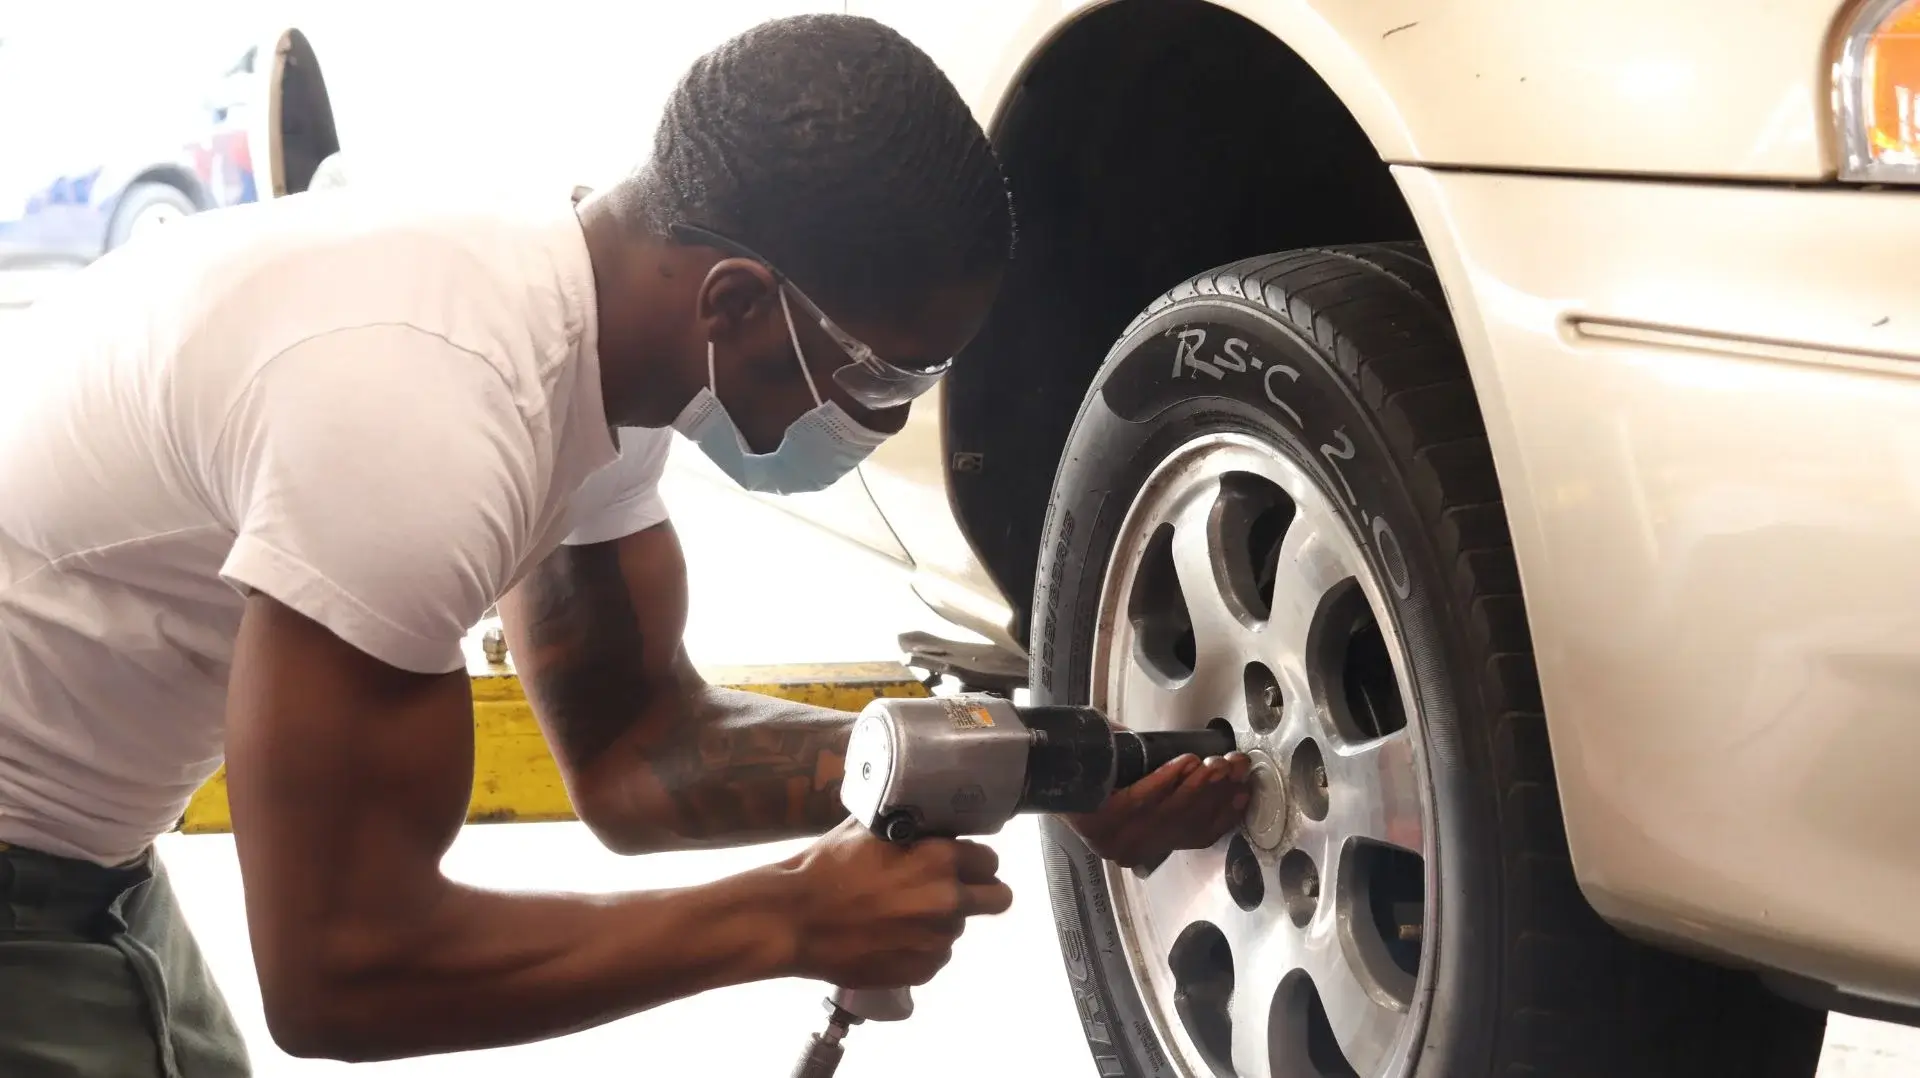 Is A Mechanic School Important To Become A Good Auto Mechanic?